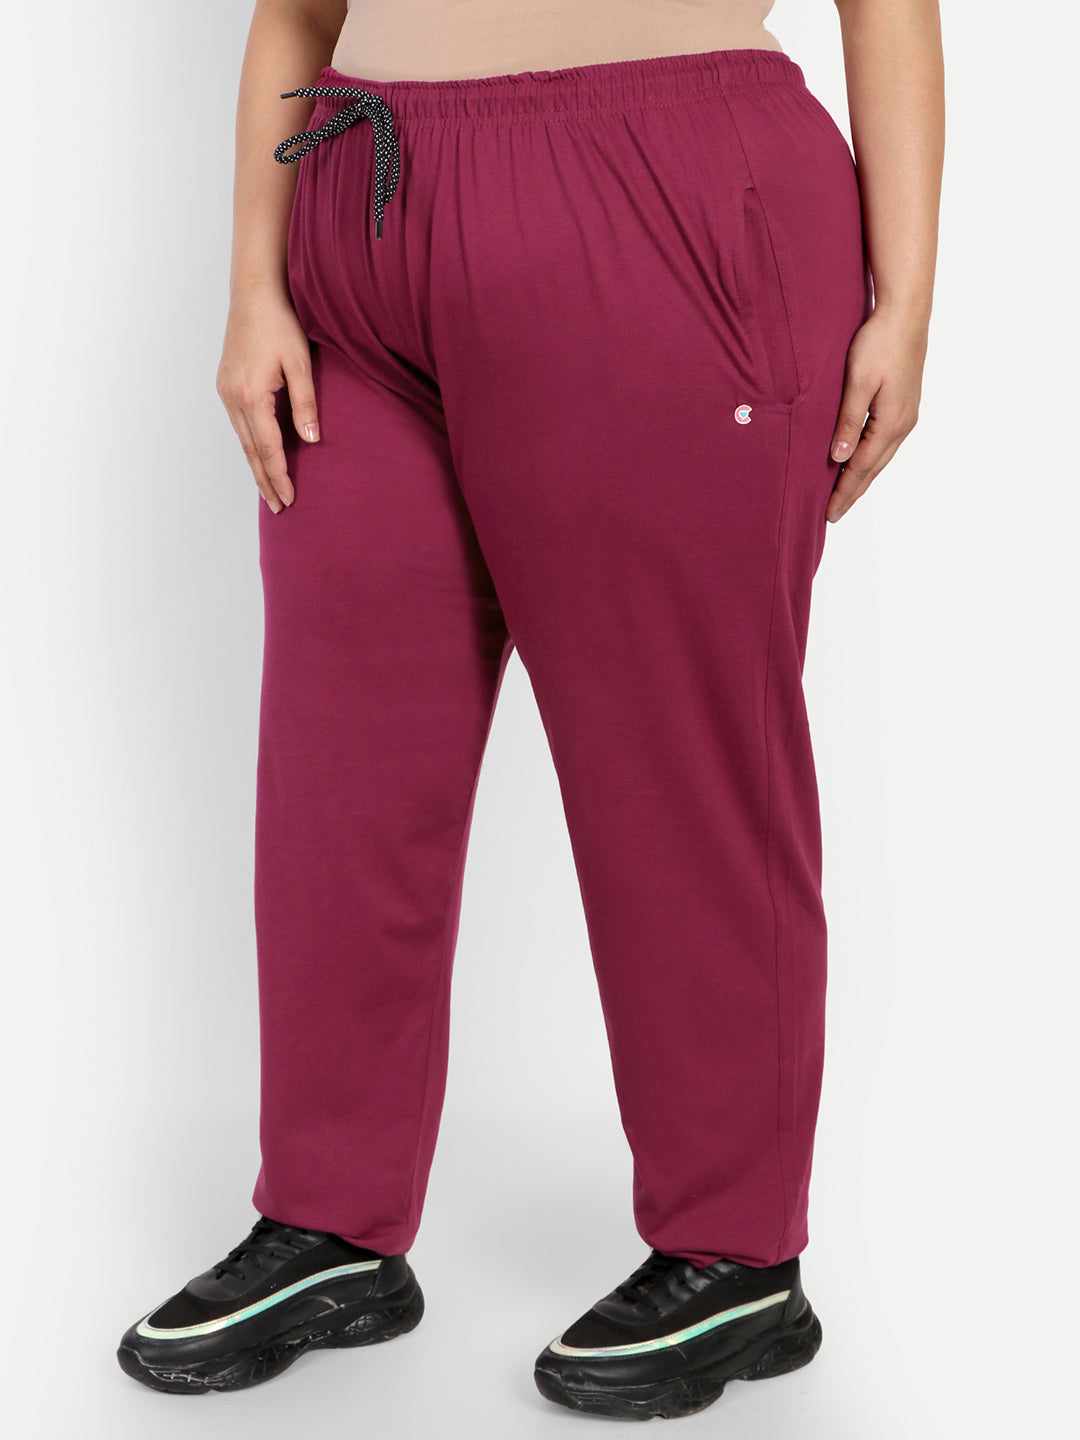 FRENCH FLEXIOUS Solid Women Maroon Track Pants  Buy FRENCH FLEXIOUS Solid Women  Maroon Track Pants Online at Best Prices in India  Flipkartcom